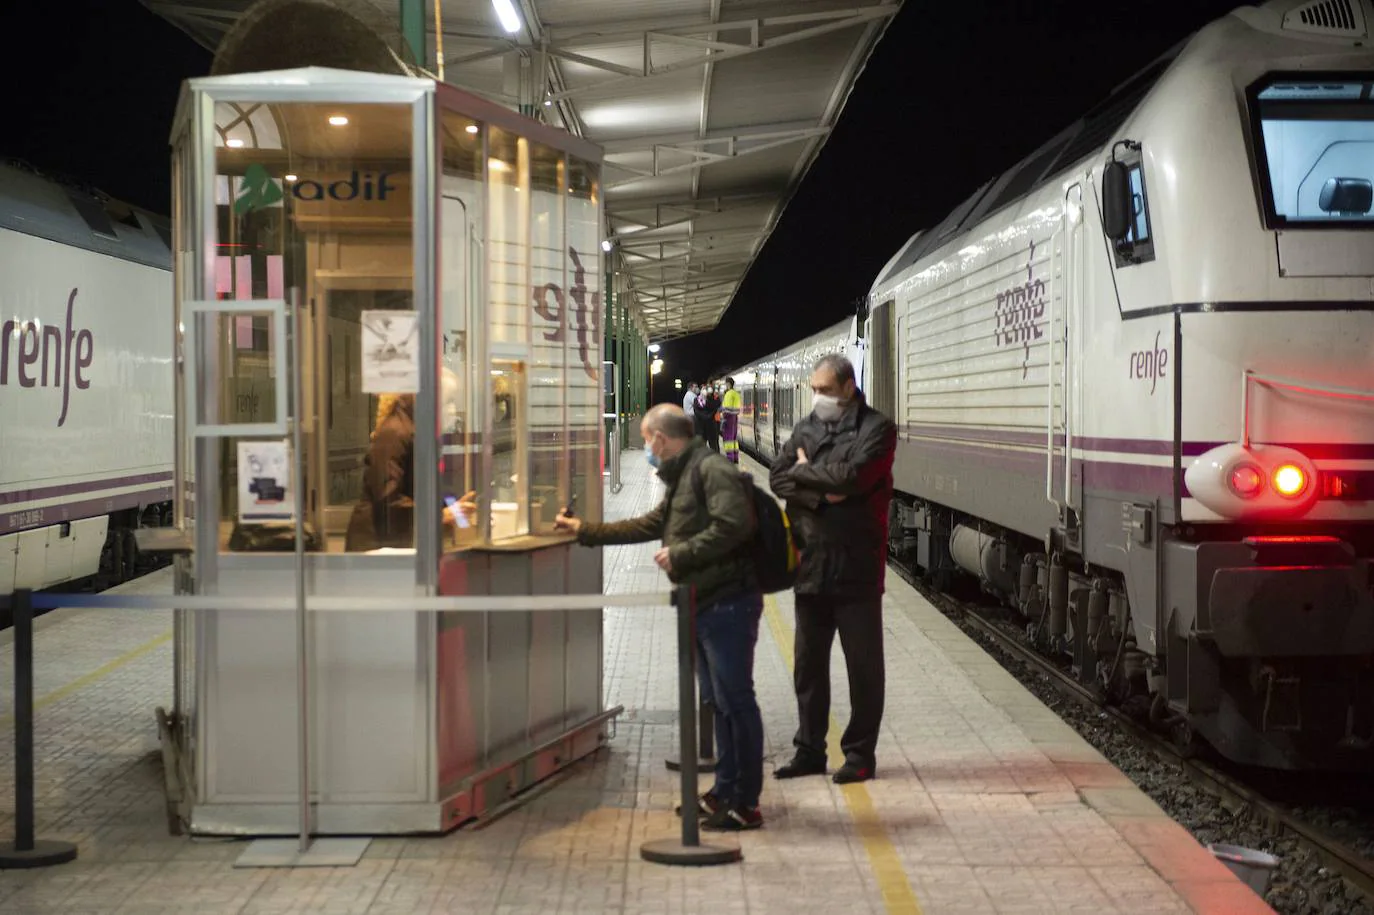 A passenger at a Renfe ticket office, in a file image.